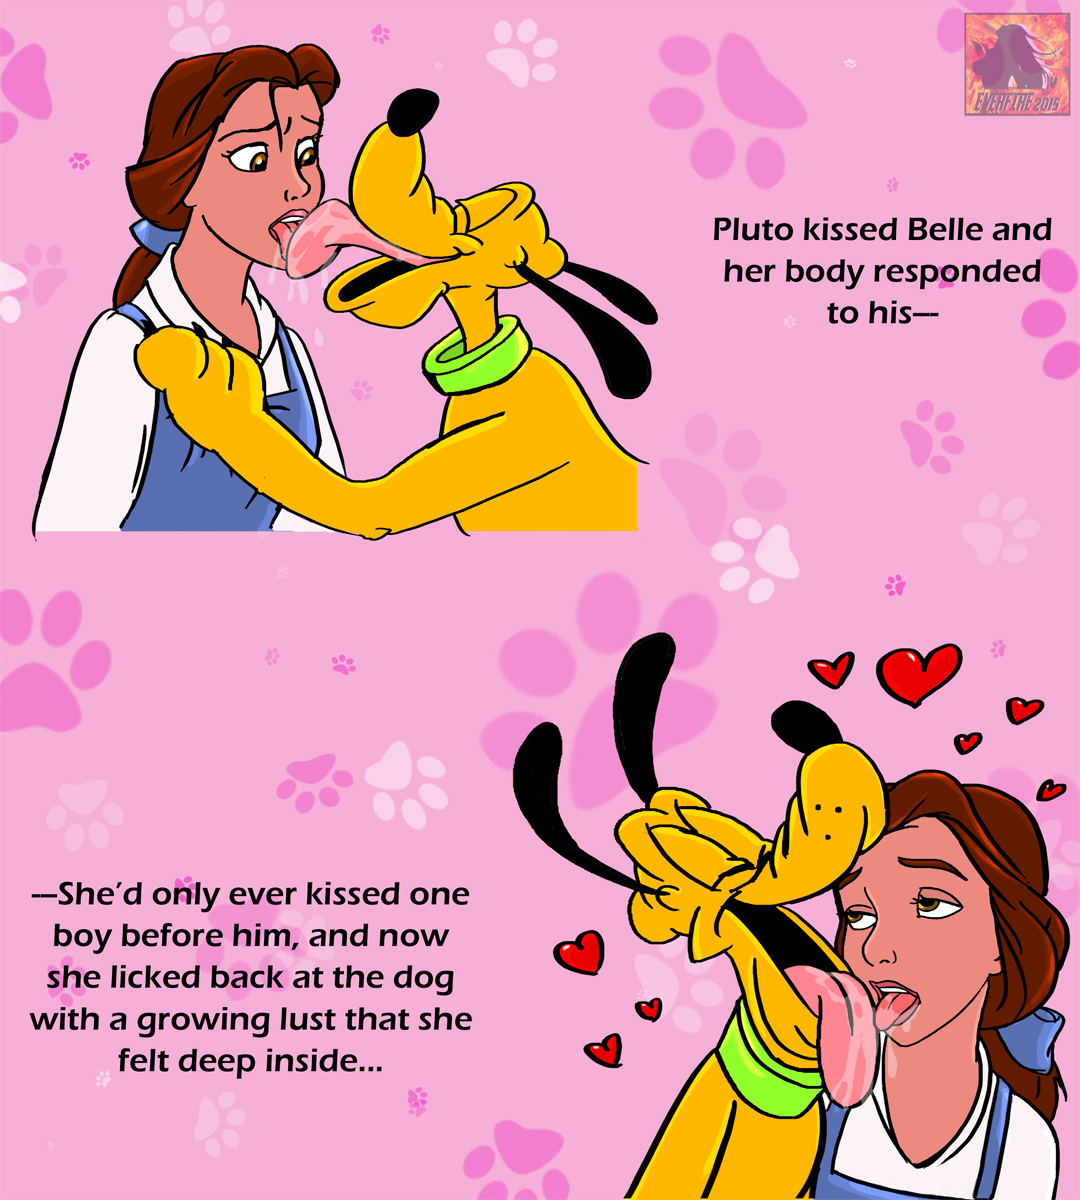 Beauty-And-The-Dog-Pluto-And-Belle-Make-Puppies-02__Gotofap.tk__92523774.jpg